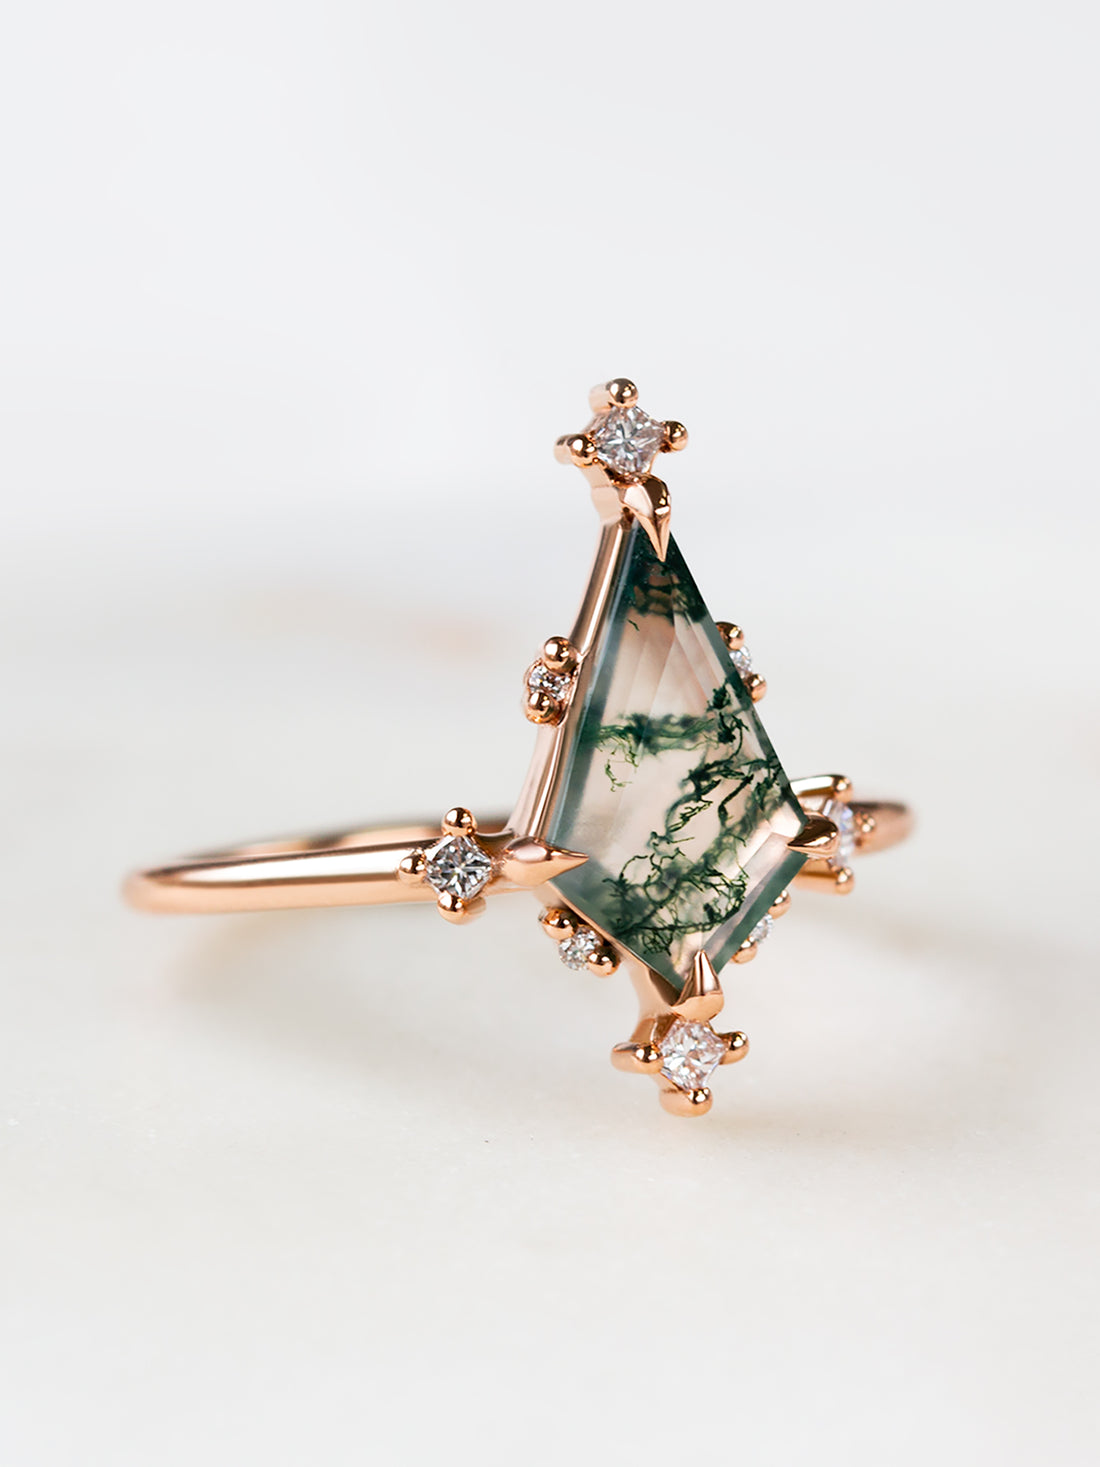 hiddenspace-engagement-ring-moss-agate-maeve-proposal-ring-unique-artdeco-designer-ring-finejewelry-5